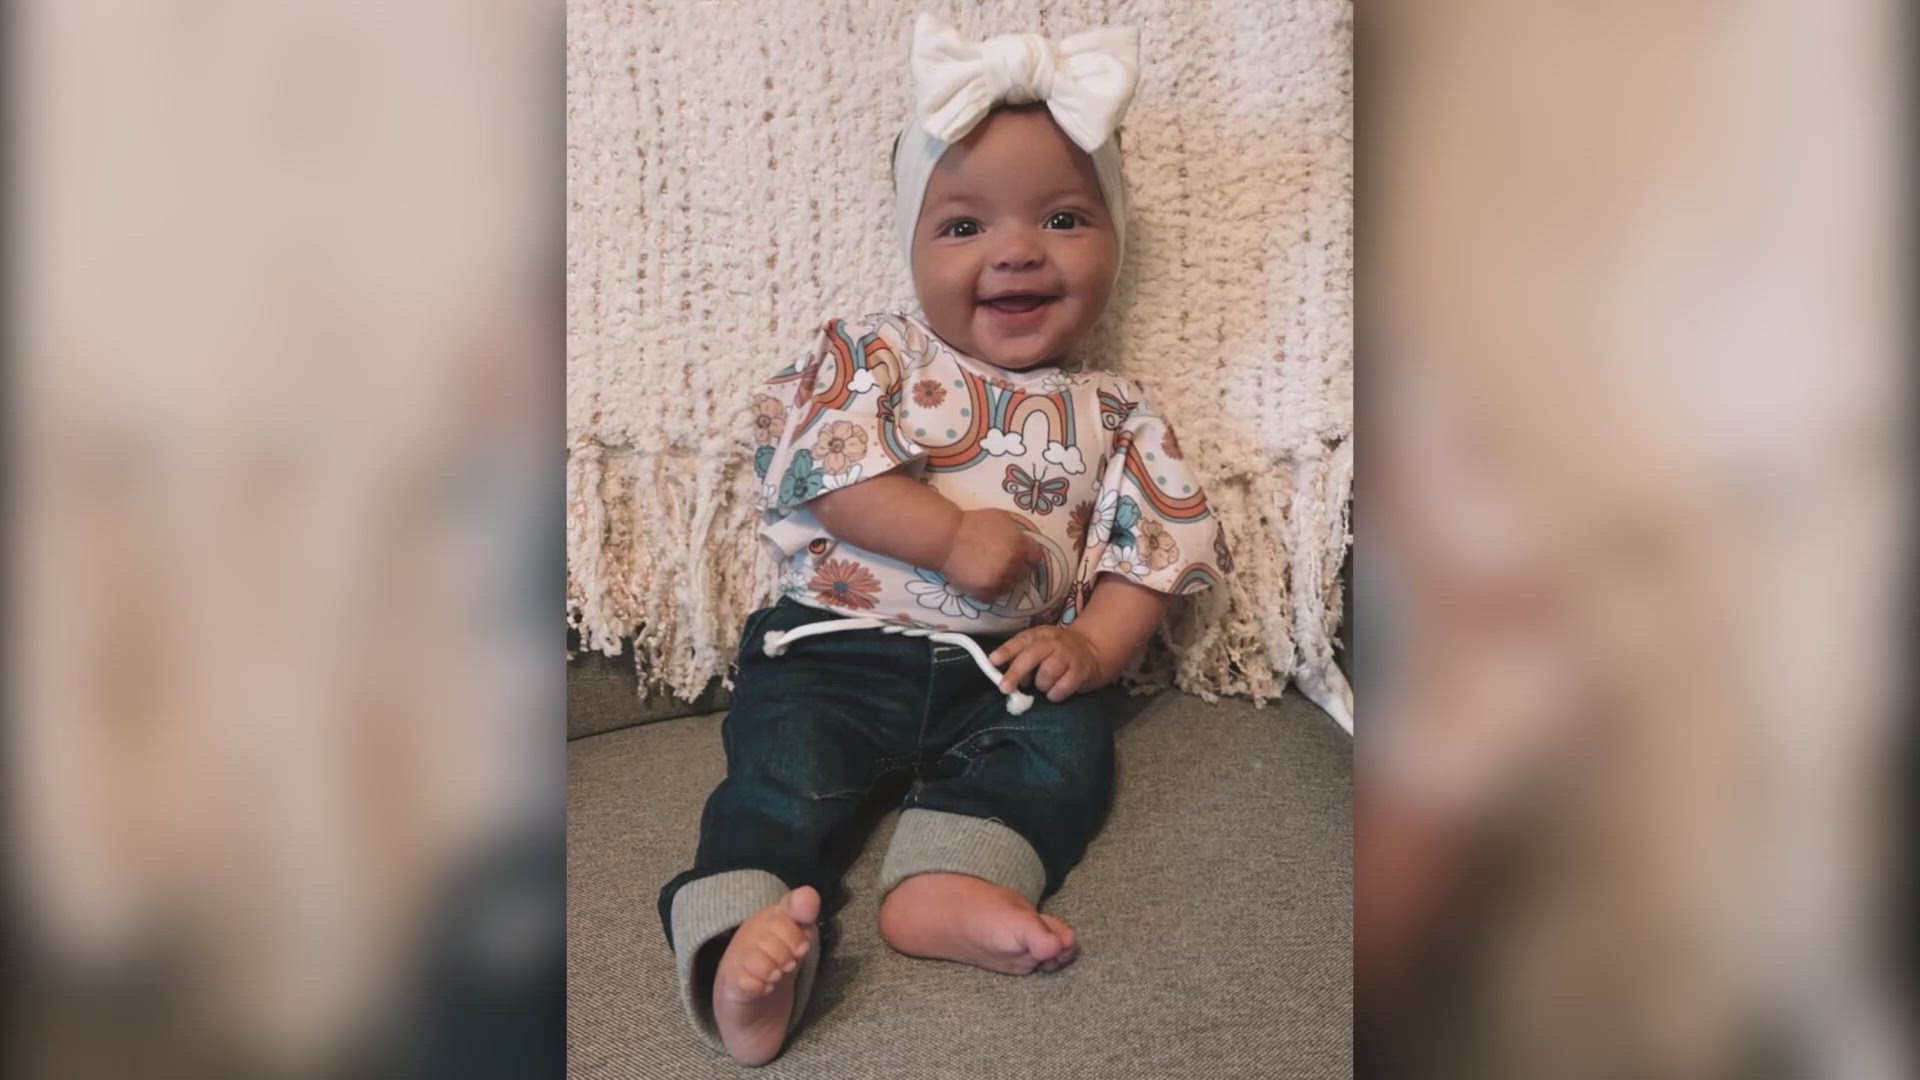 Ariya Paige was the bright spot in her family and now they’re fighting for justice on her behalf. The 10-month-old’s baby sitter, Rhonda Jewell, was arrested.